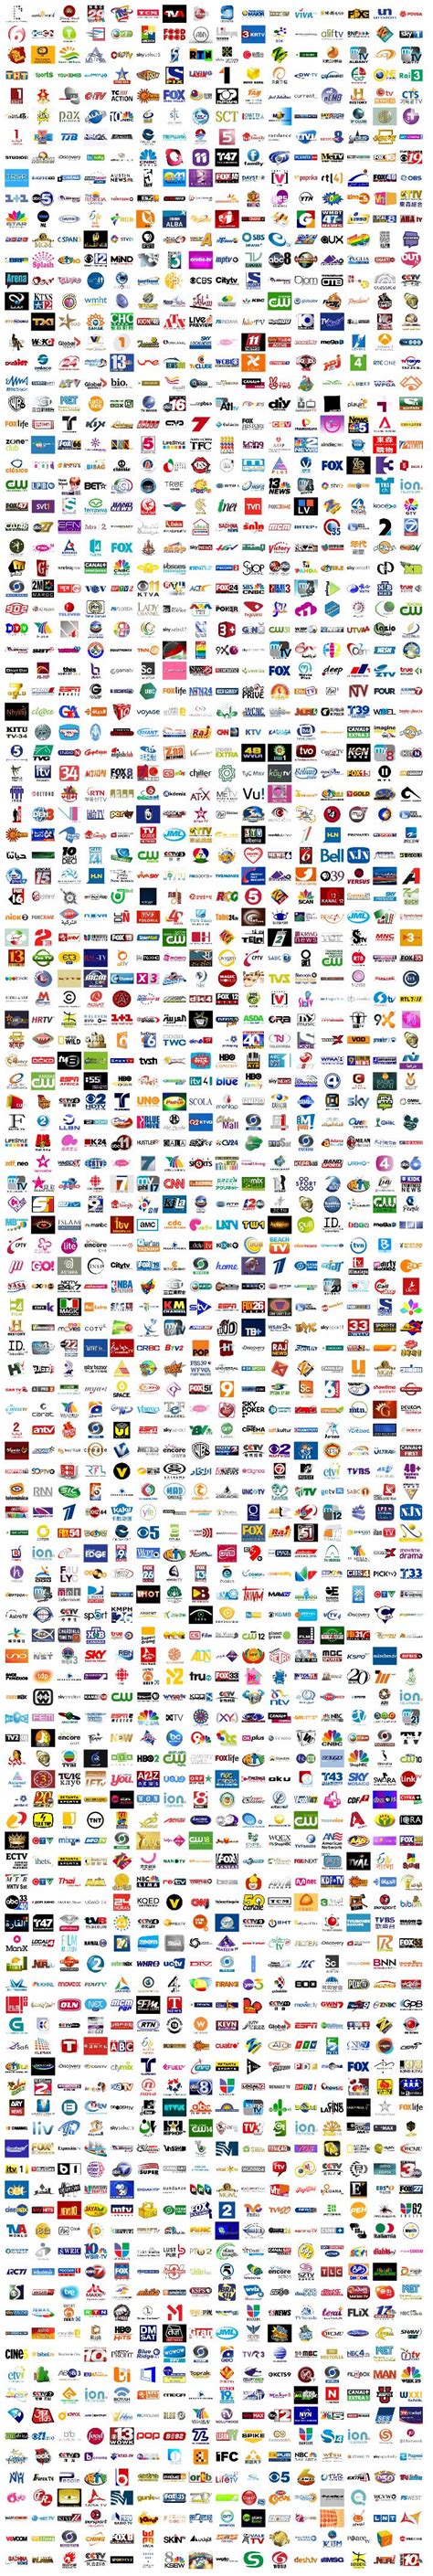 Of course, because some channels. What 9,000 TV Channel Logos Looks Like | CableTV.com